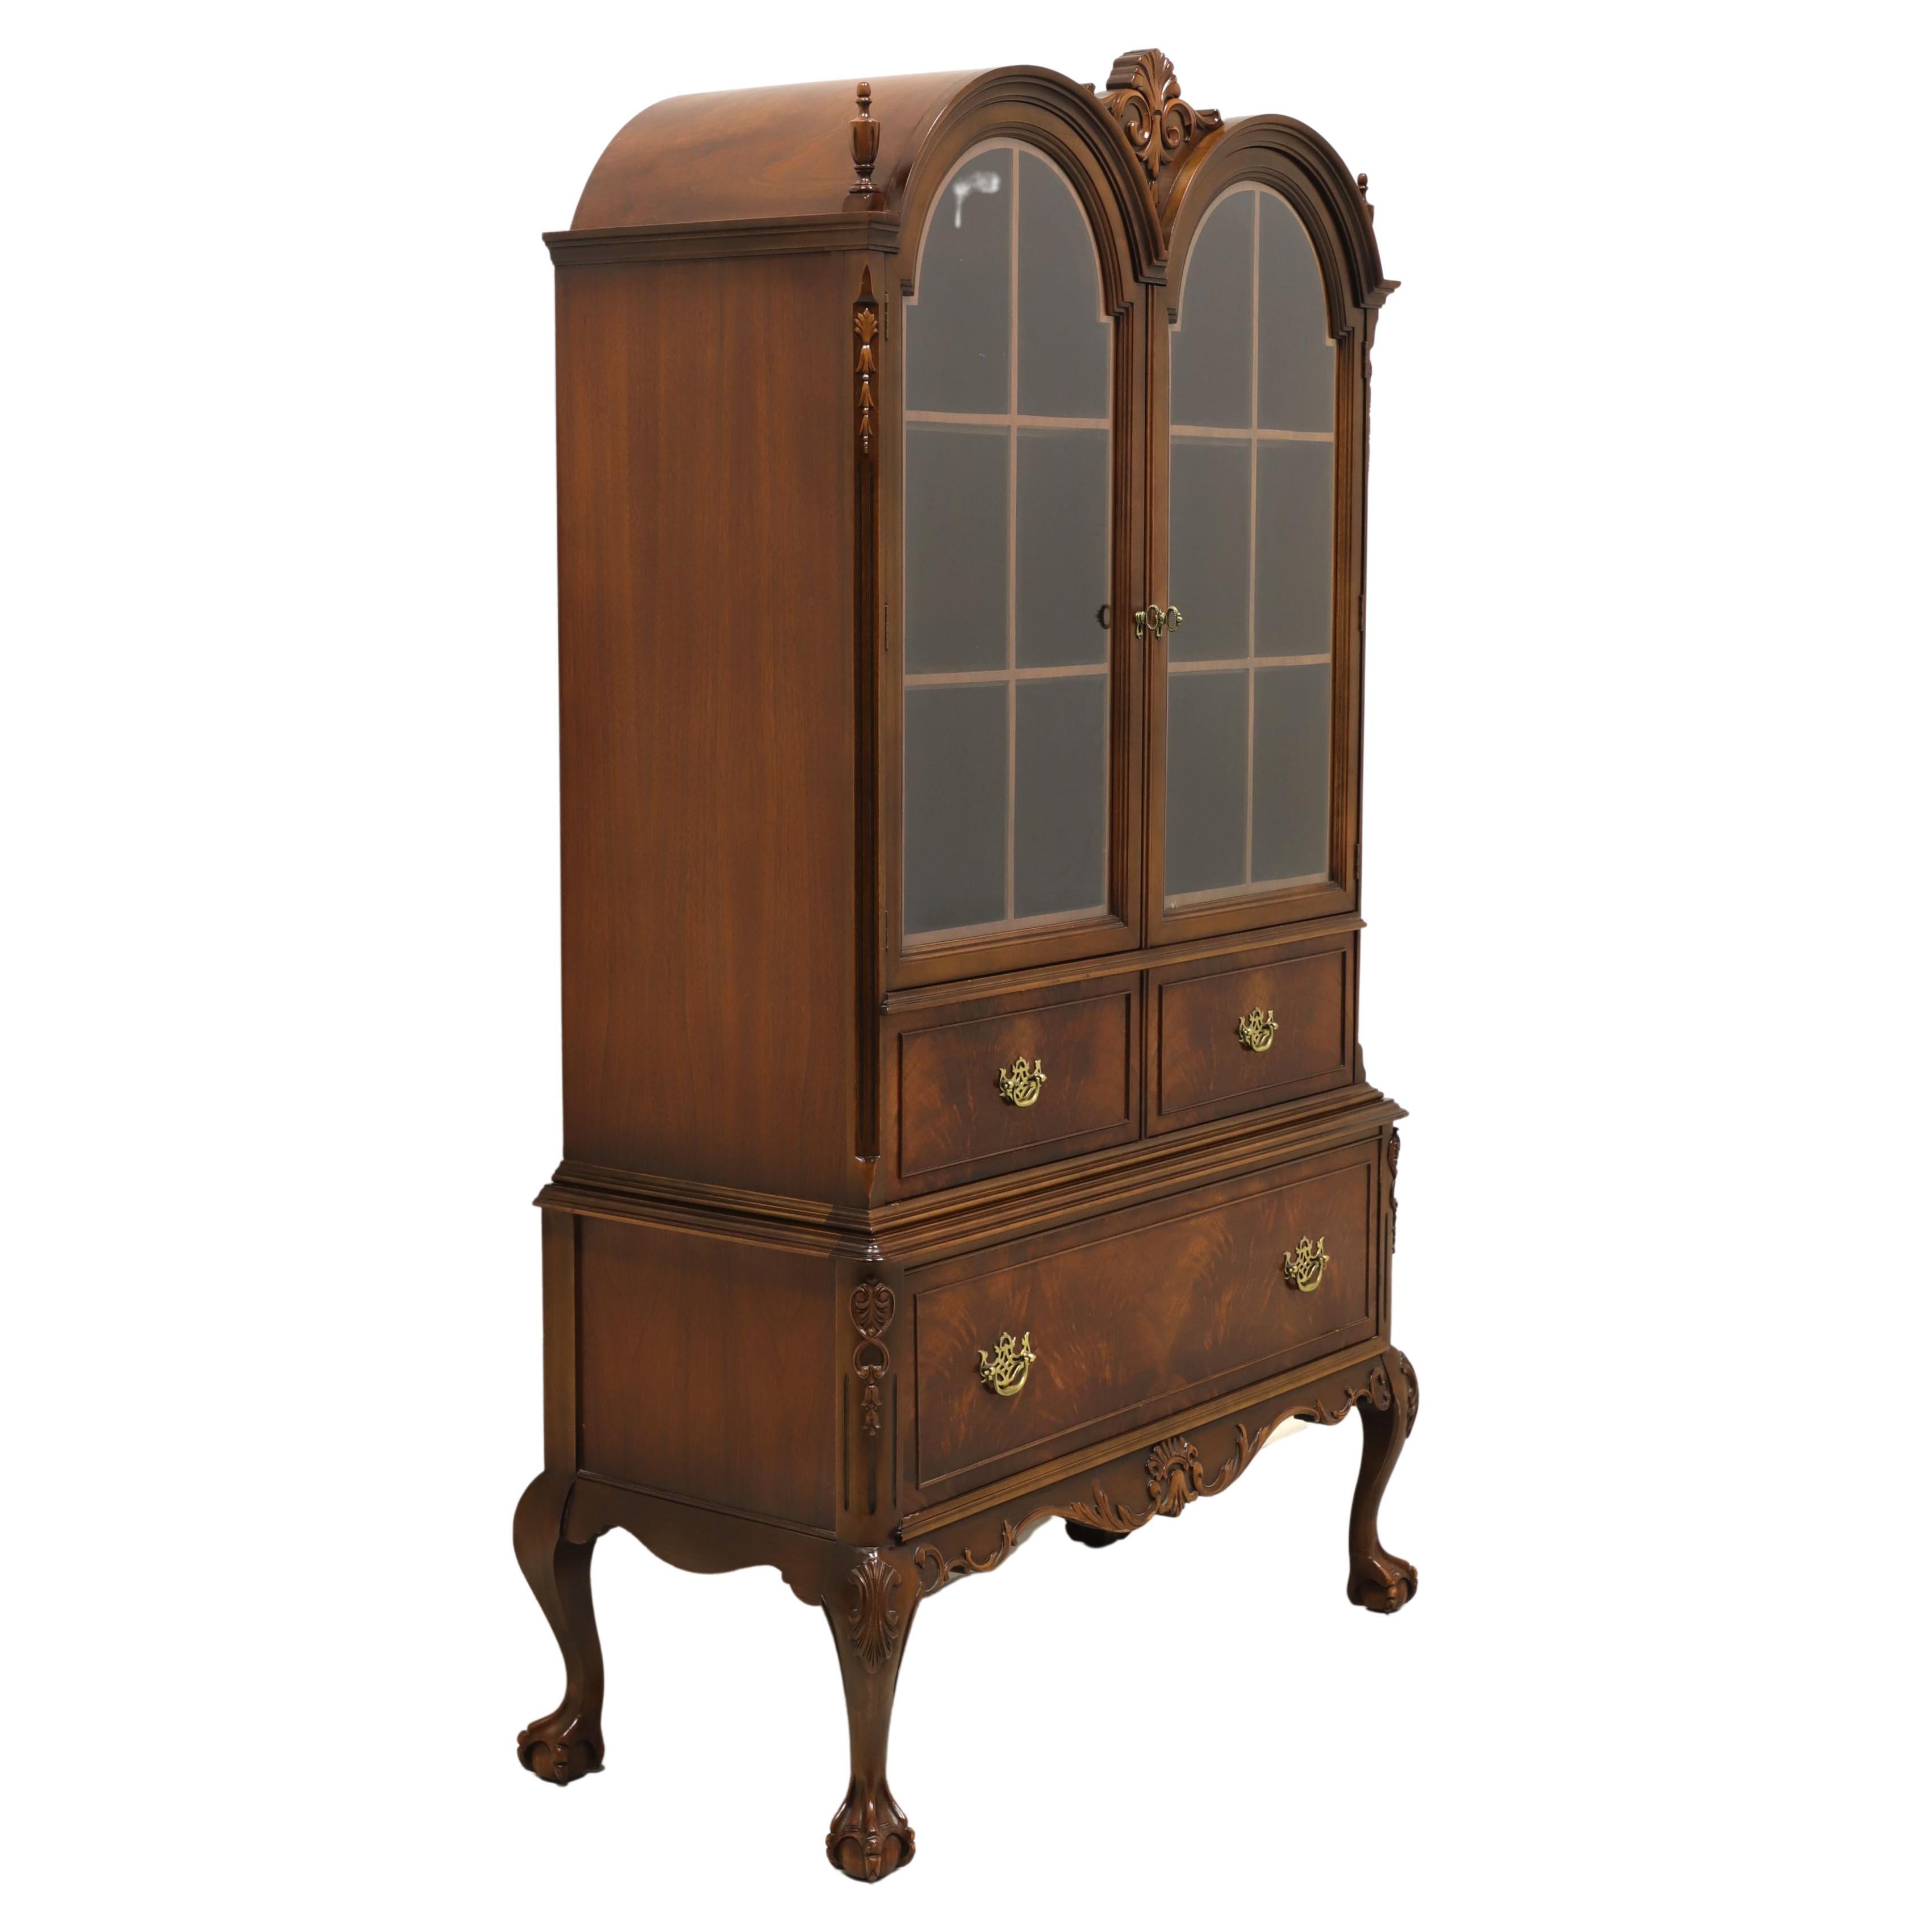 Mahogany Chippendale Double Bonnet Curio Display Cabinet by LAMMERT'S FURNITURE